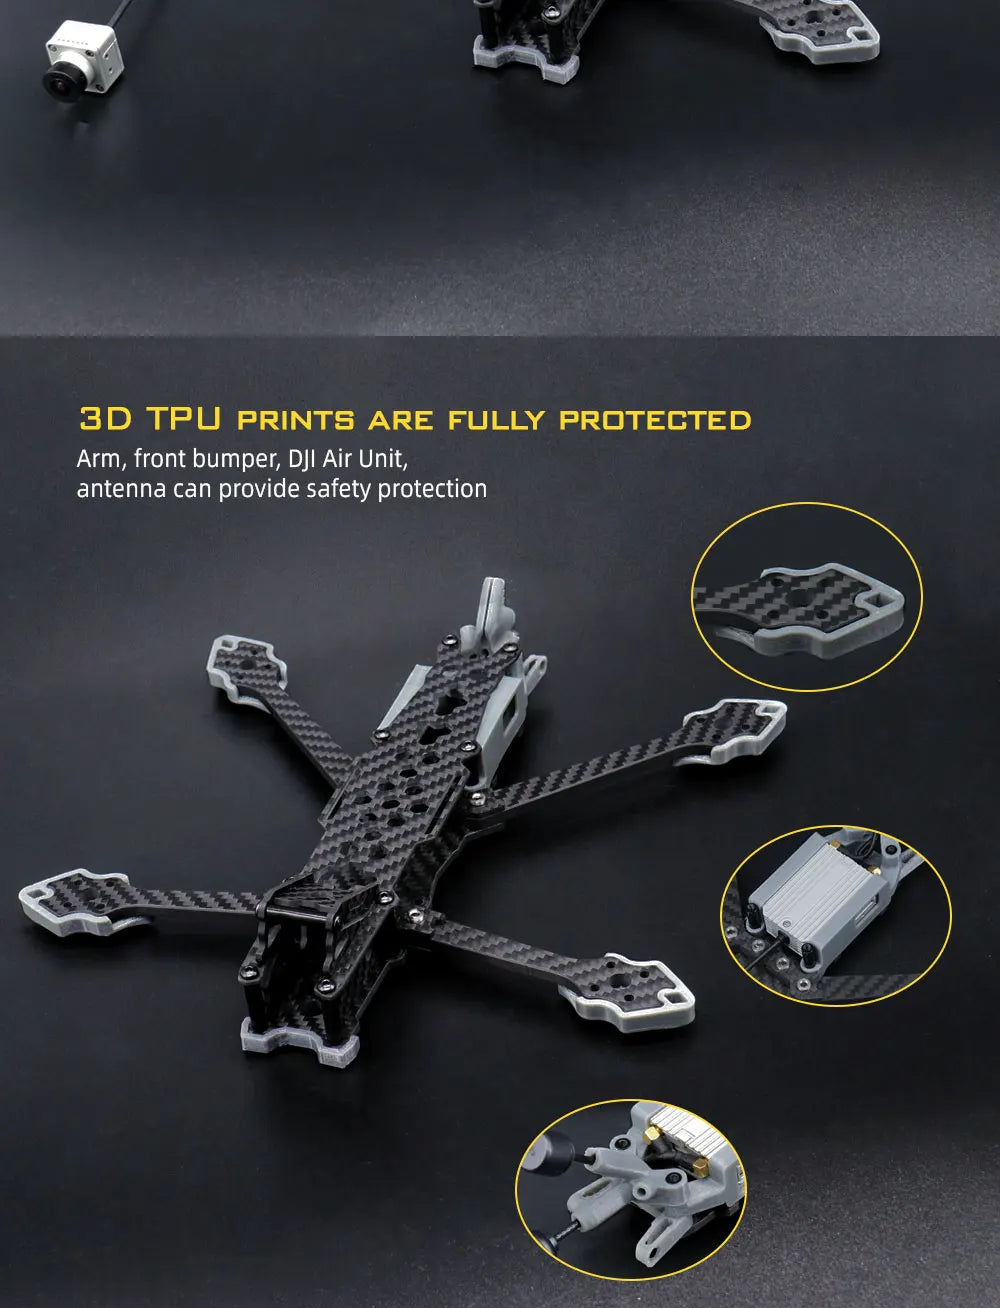 Avenger  5inch FPV frame Kit, 3D TPU PRINTS ARE FULLY PROTECTED Arm, front bumper;